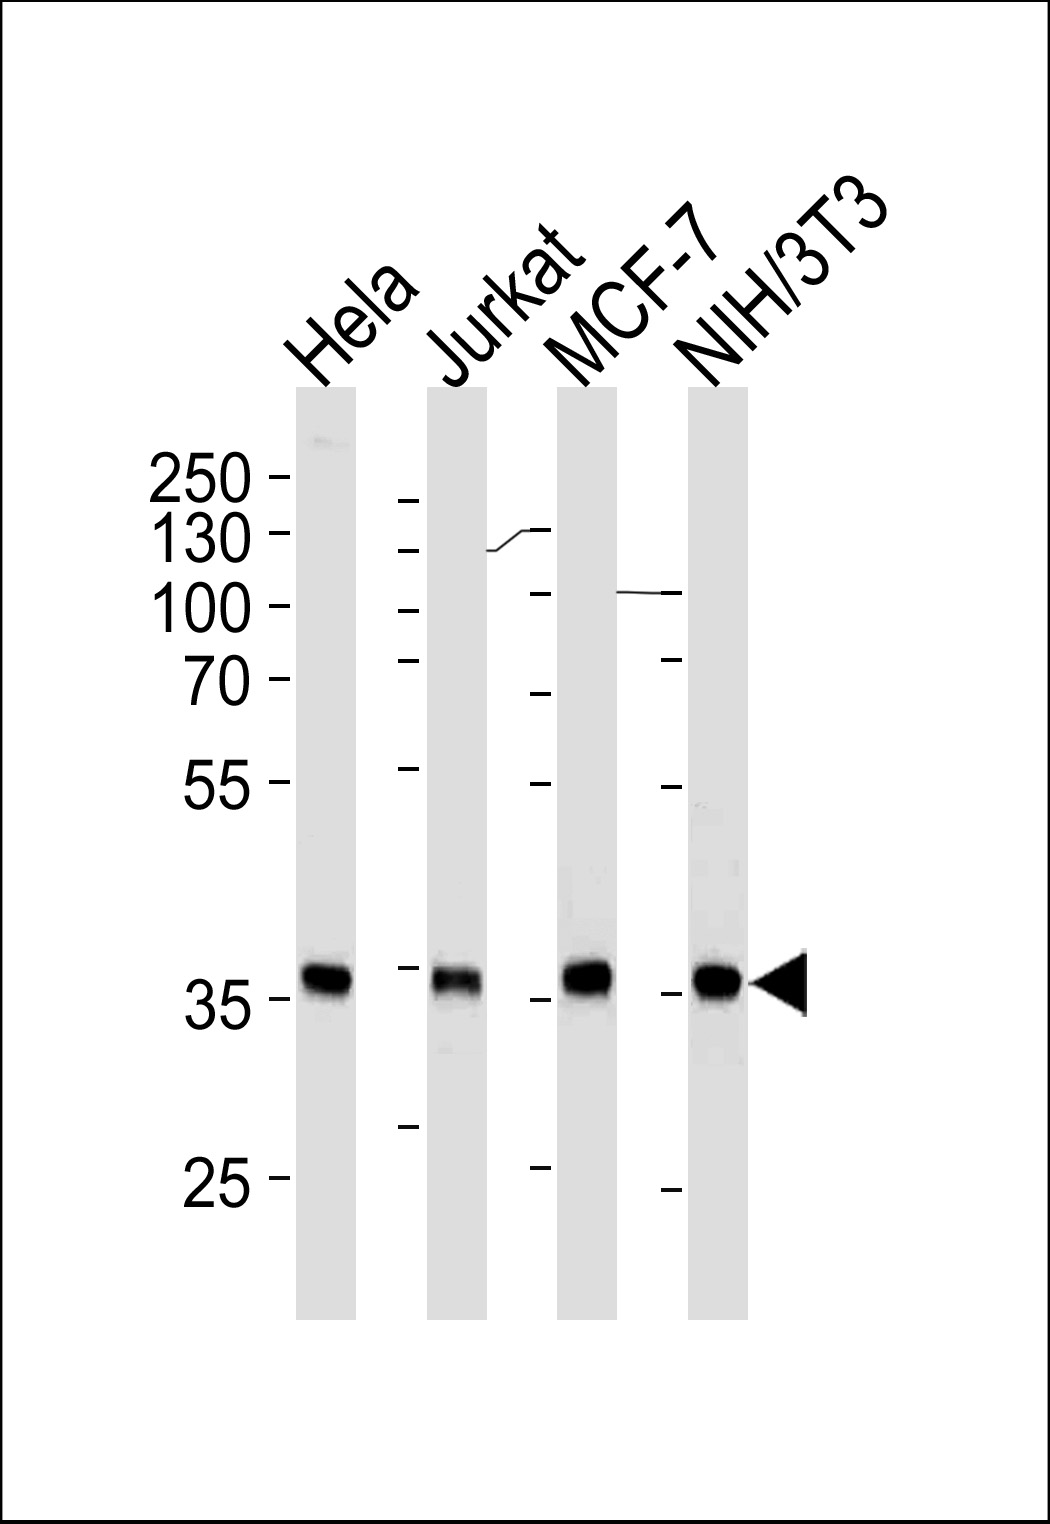 NPM1 Antibody (Cat. #AM2201b) western blot analysis in Hela,Jurkat,MCF-7,mouse NIH/3T3 cell line lysates (35?g/lane).This demonstrates the NPM1 antibody detected the NPM1 protein (arrow).